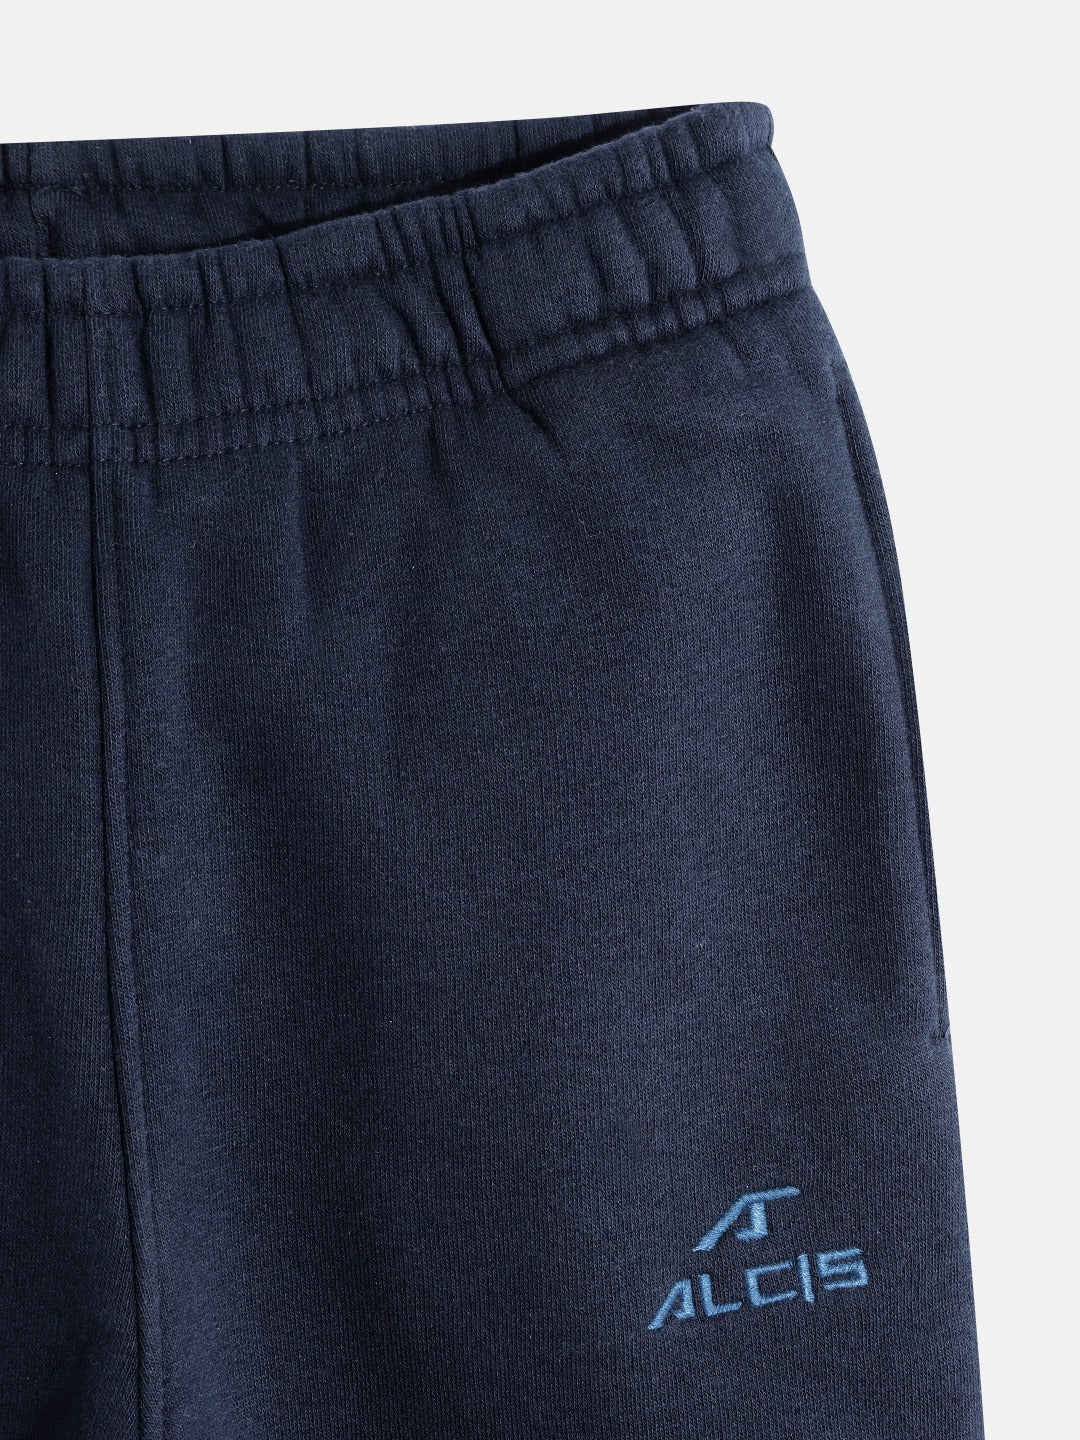 ALCIS Boys Navy Blue Solid With Brand Logo Embroidered Track Pants